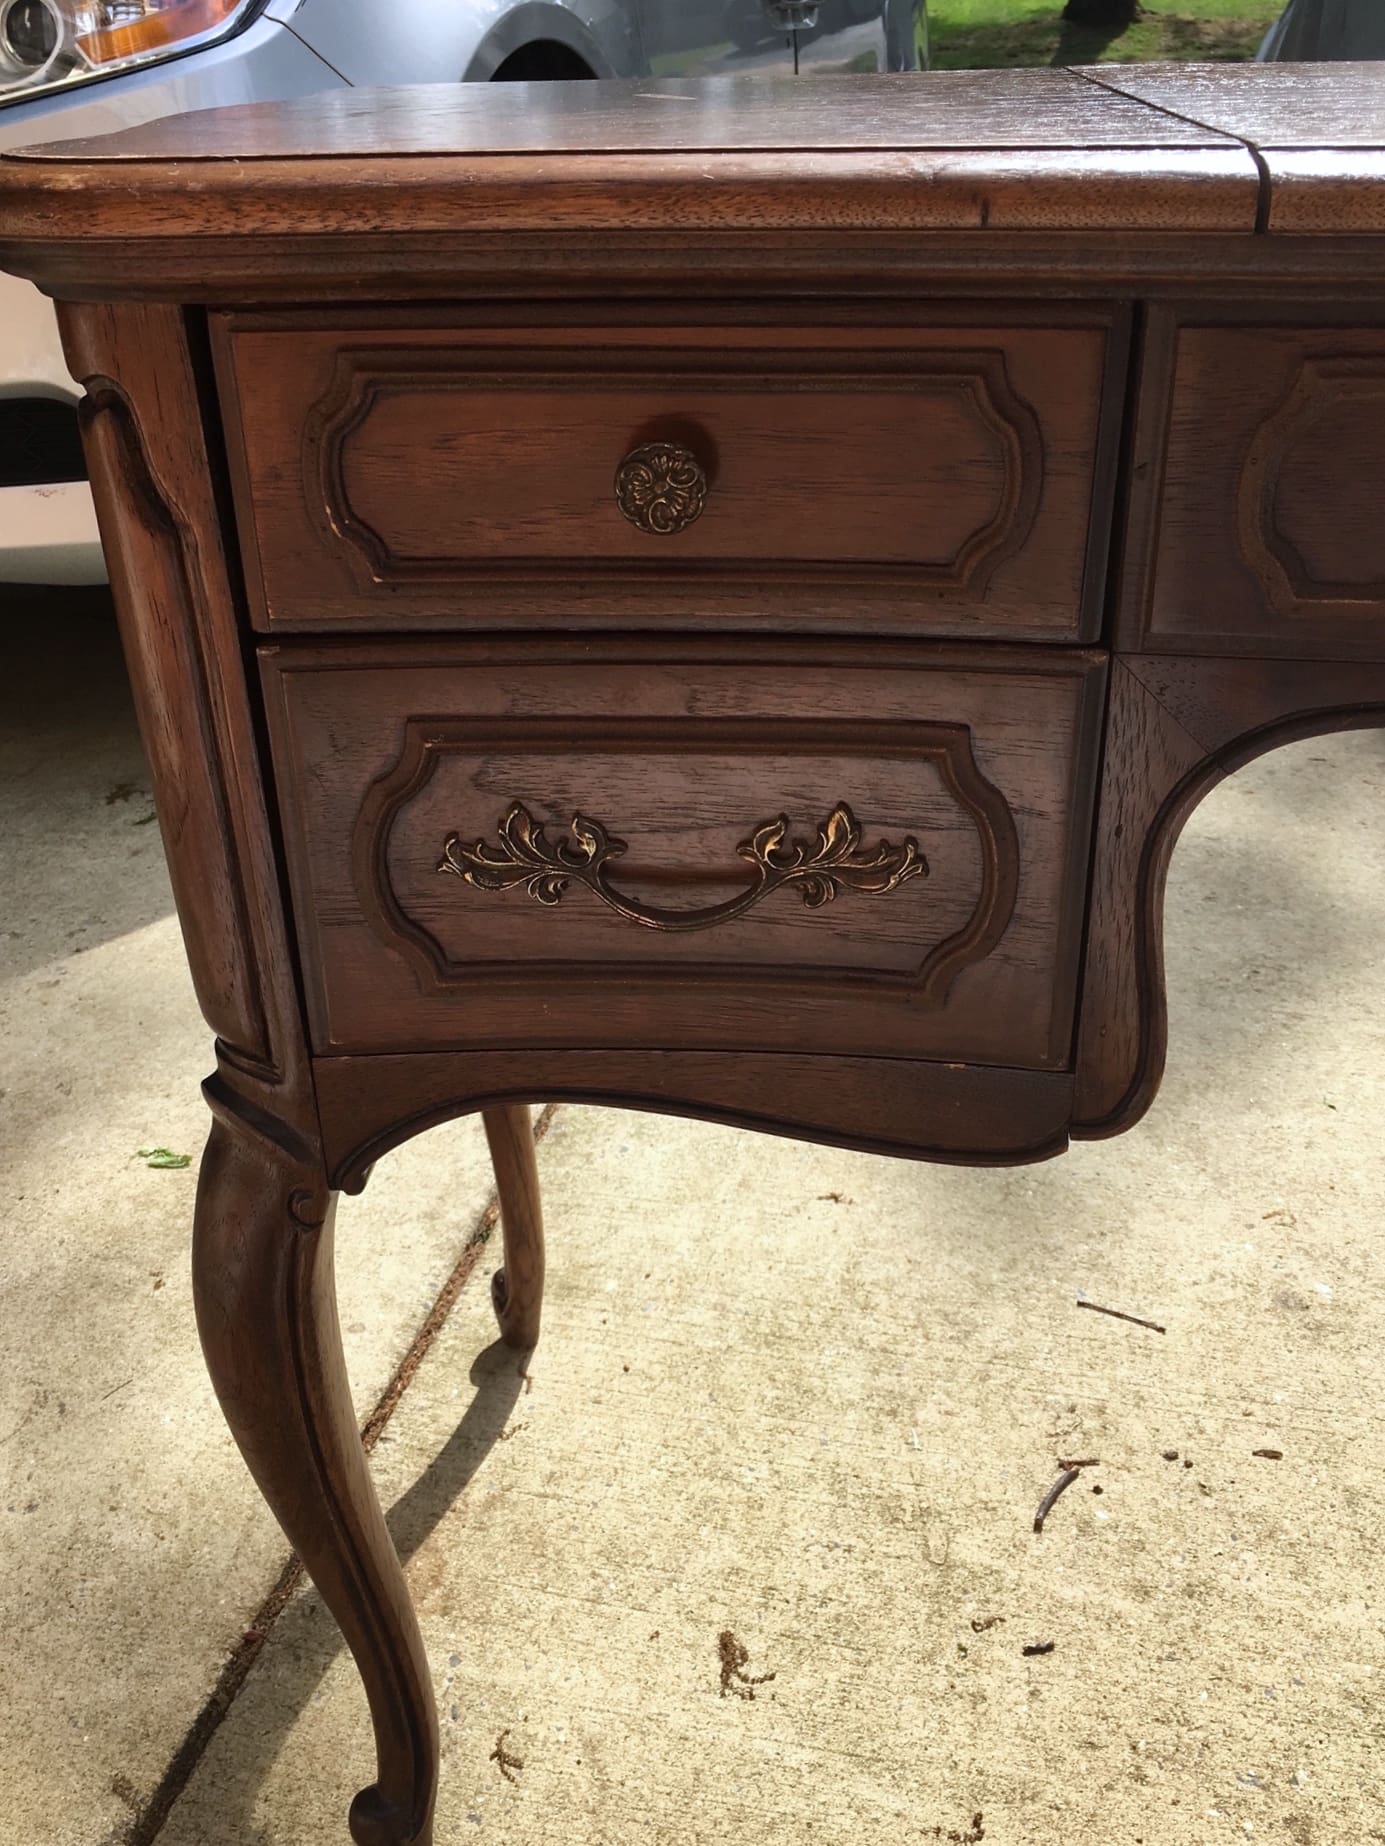 French Provincial vanity makeover - French Provincial handles and pulls. - Thrift Diving